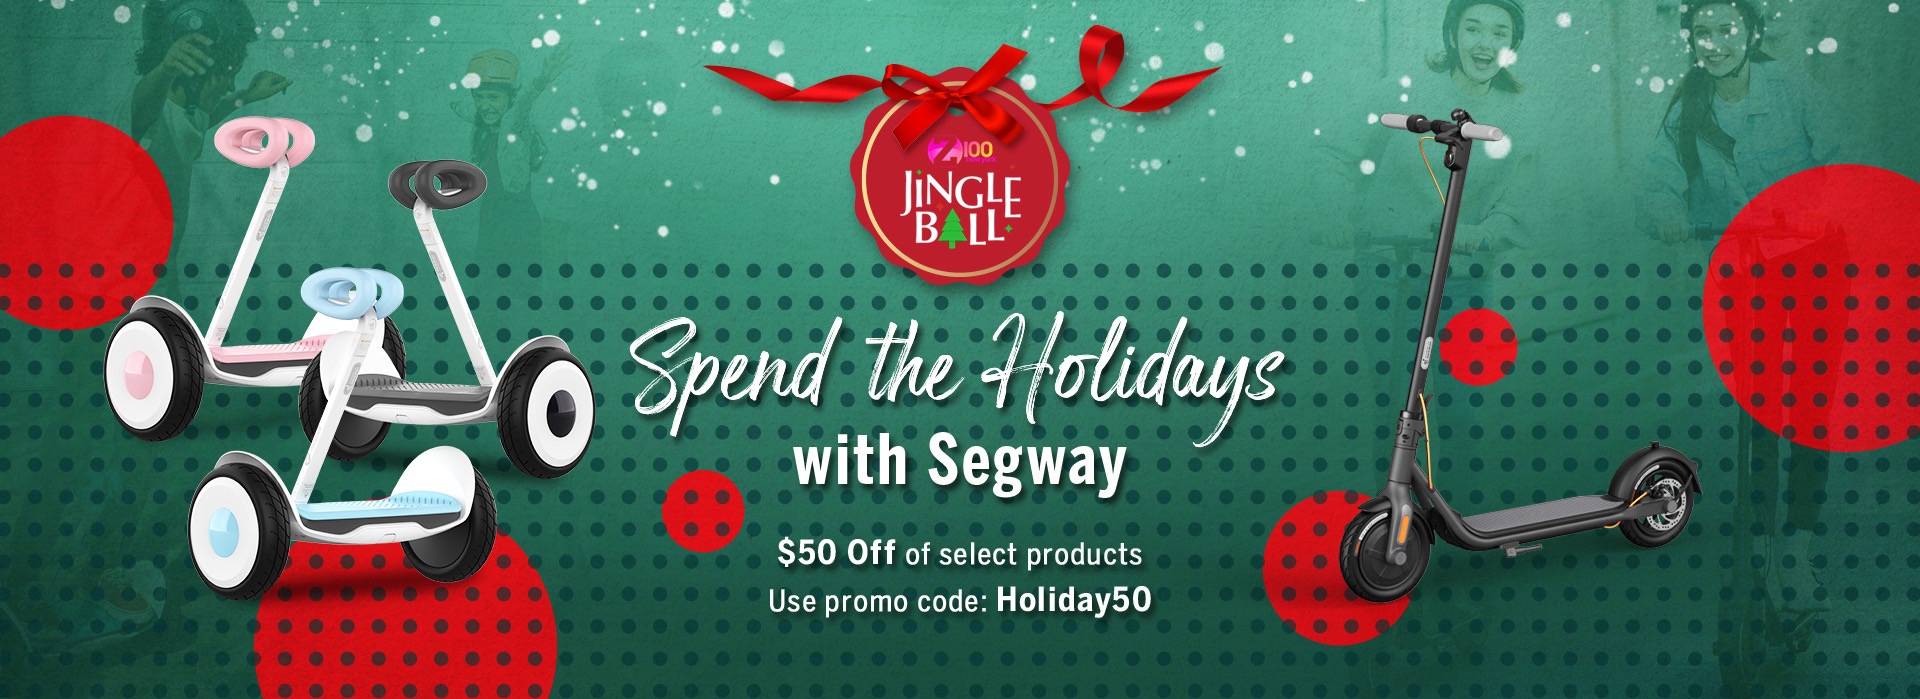 Spend the holidays with Segway